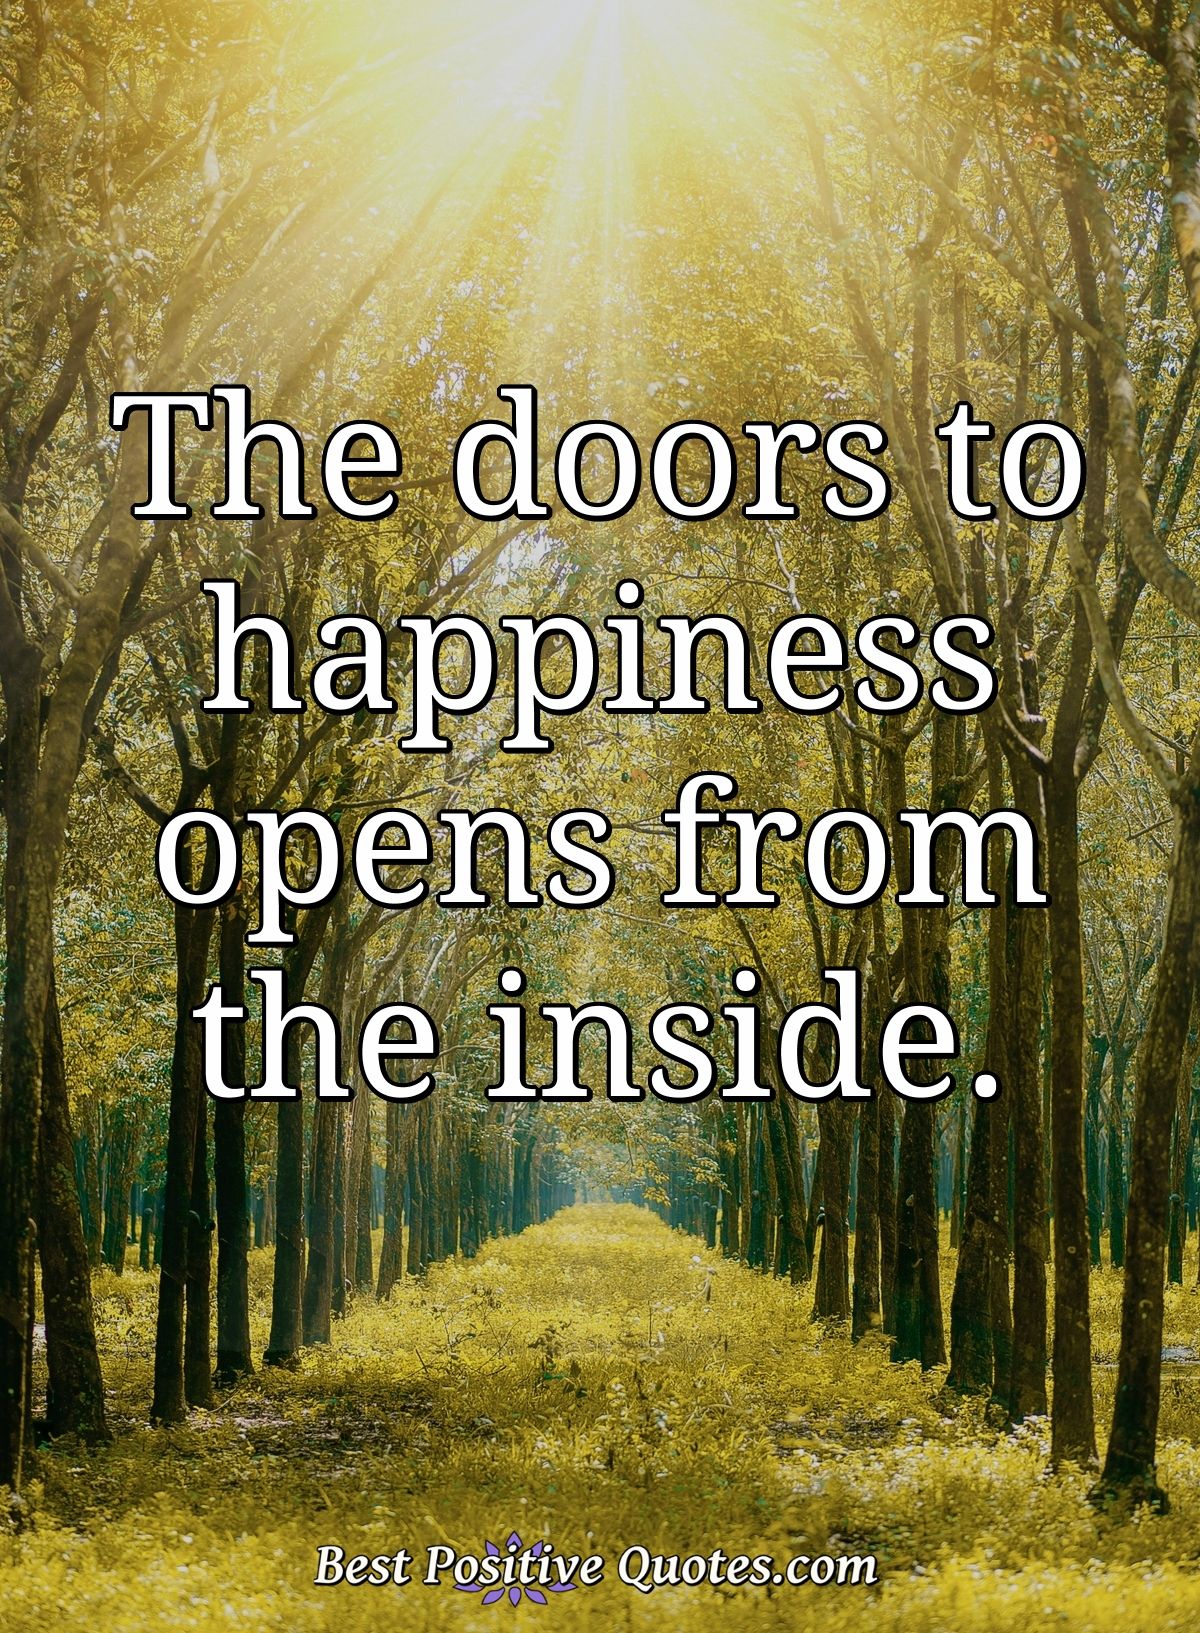 The doors to happiness opens from the inside. - Anonymous